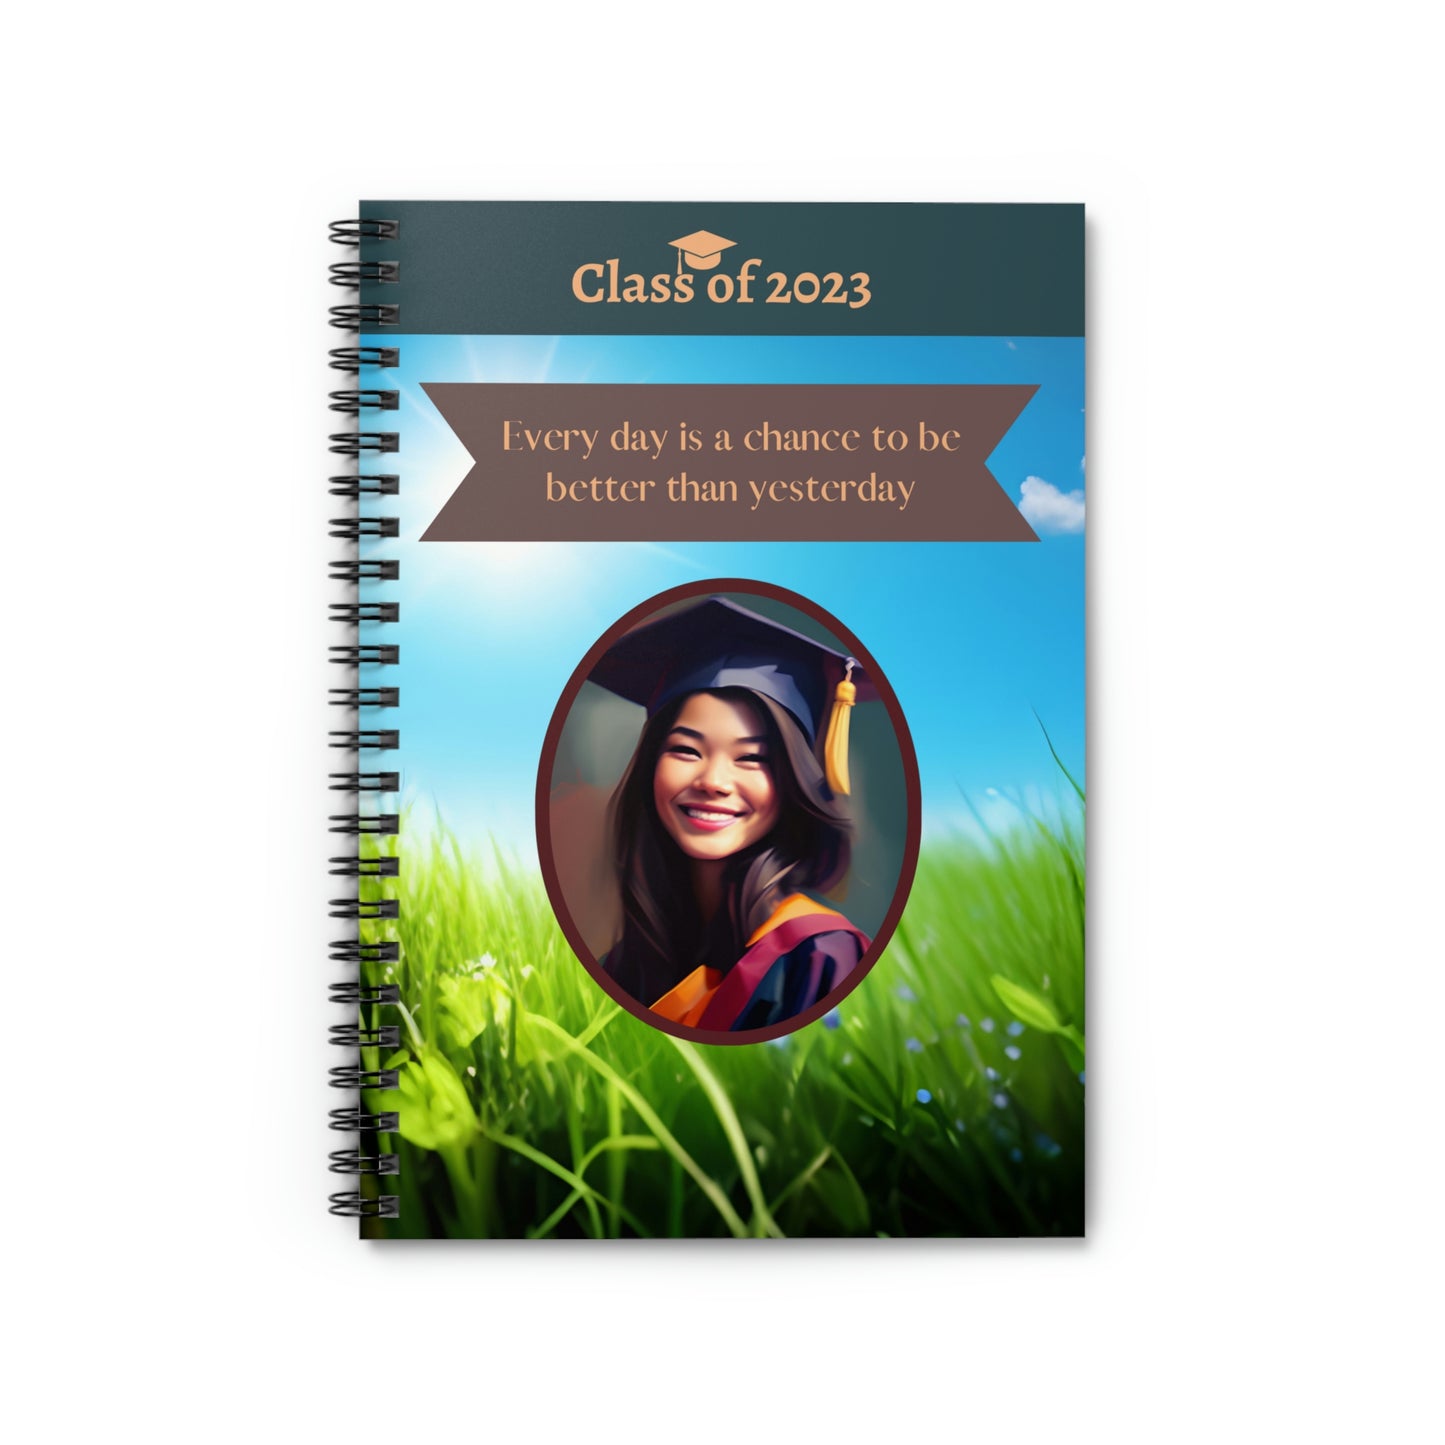 Class of 2023 Graduate Journal - (Asian Young Lady 2) - Ruled Line